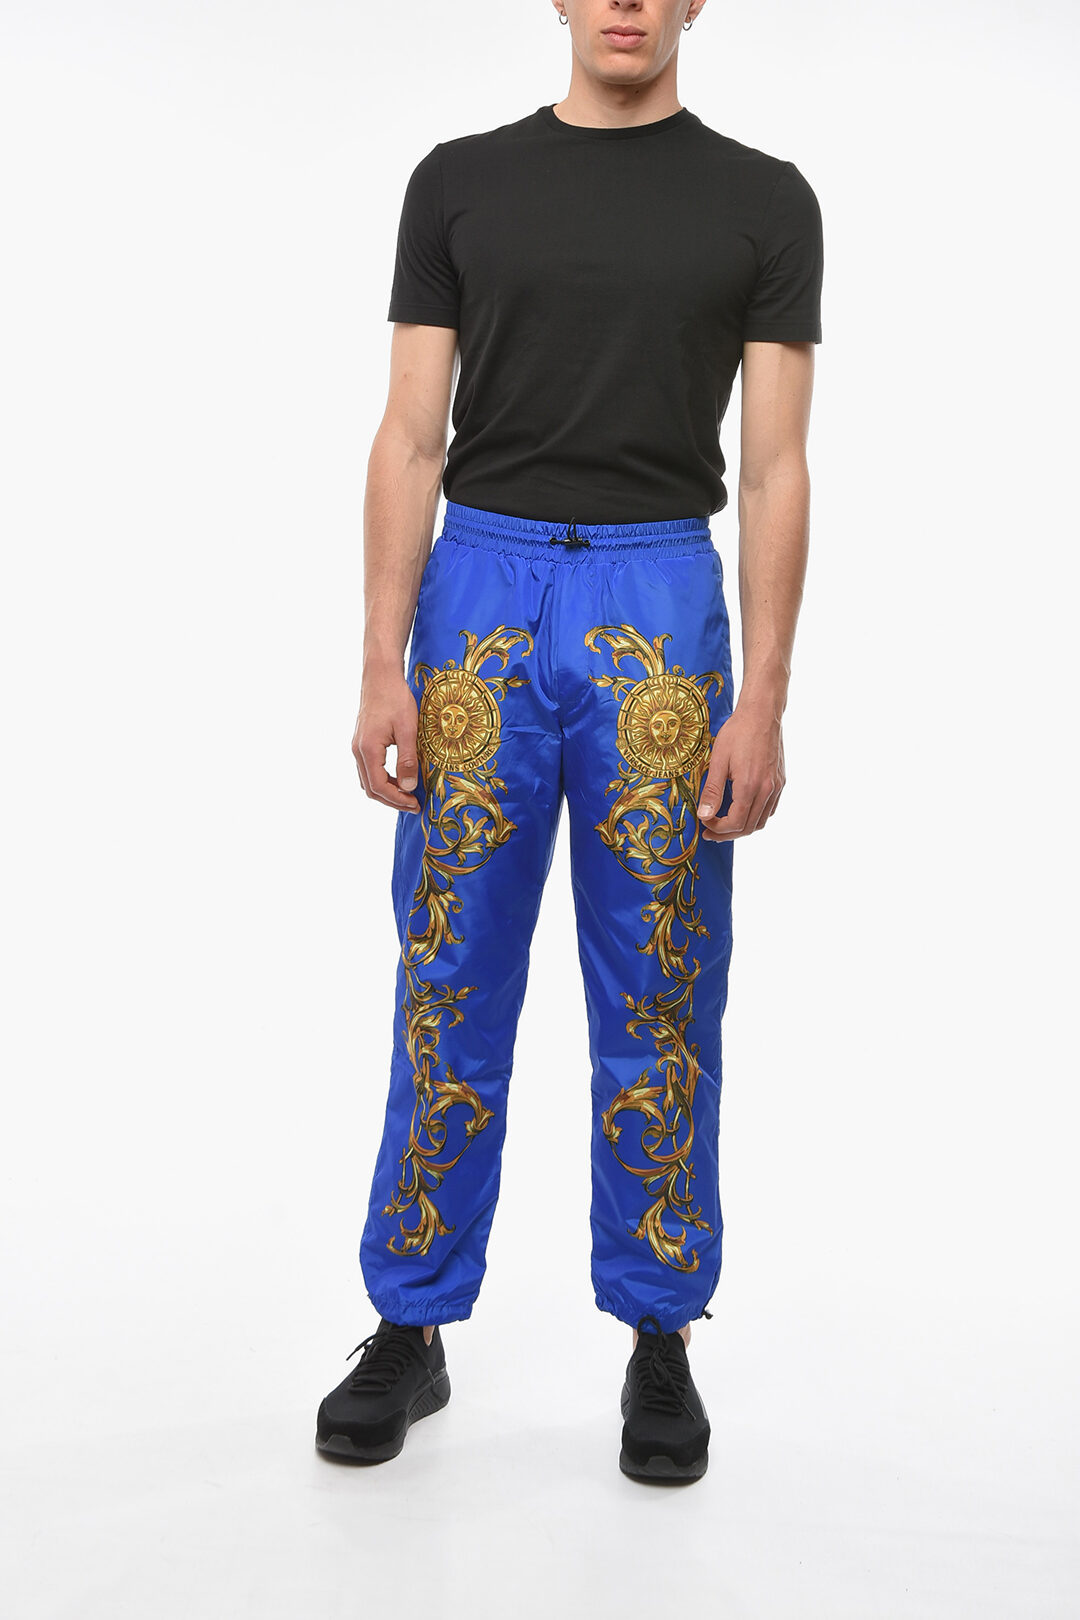  Versace Jeans Couture Pants  Made in Italy  TWOVAULT